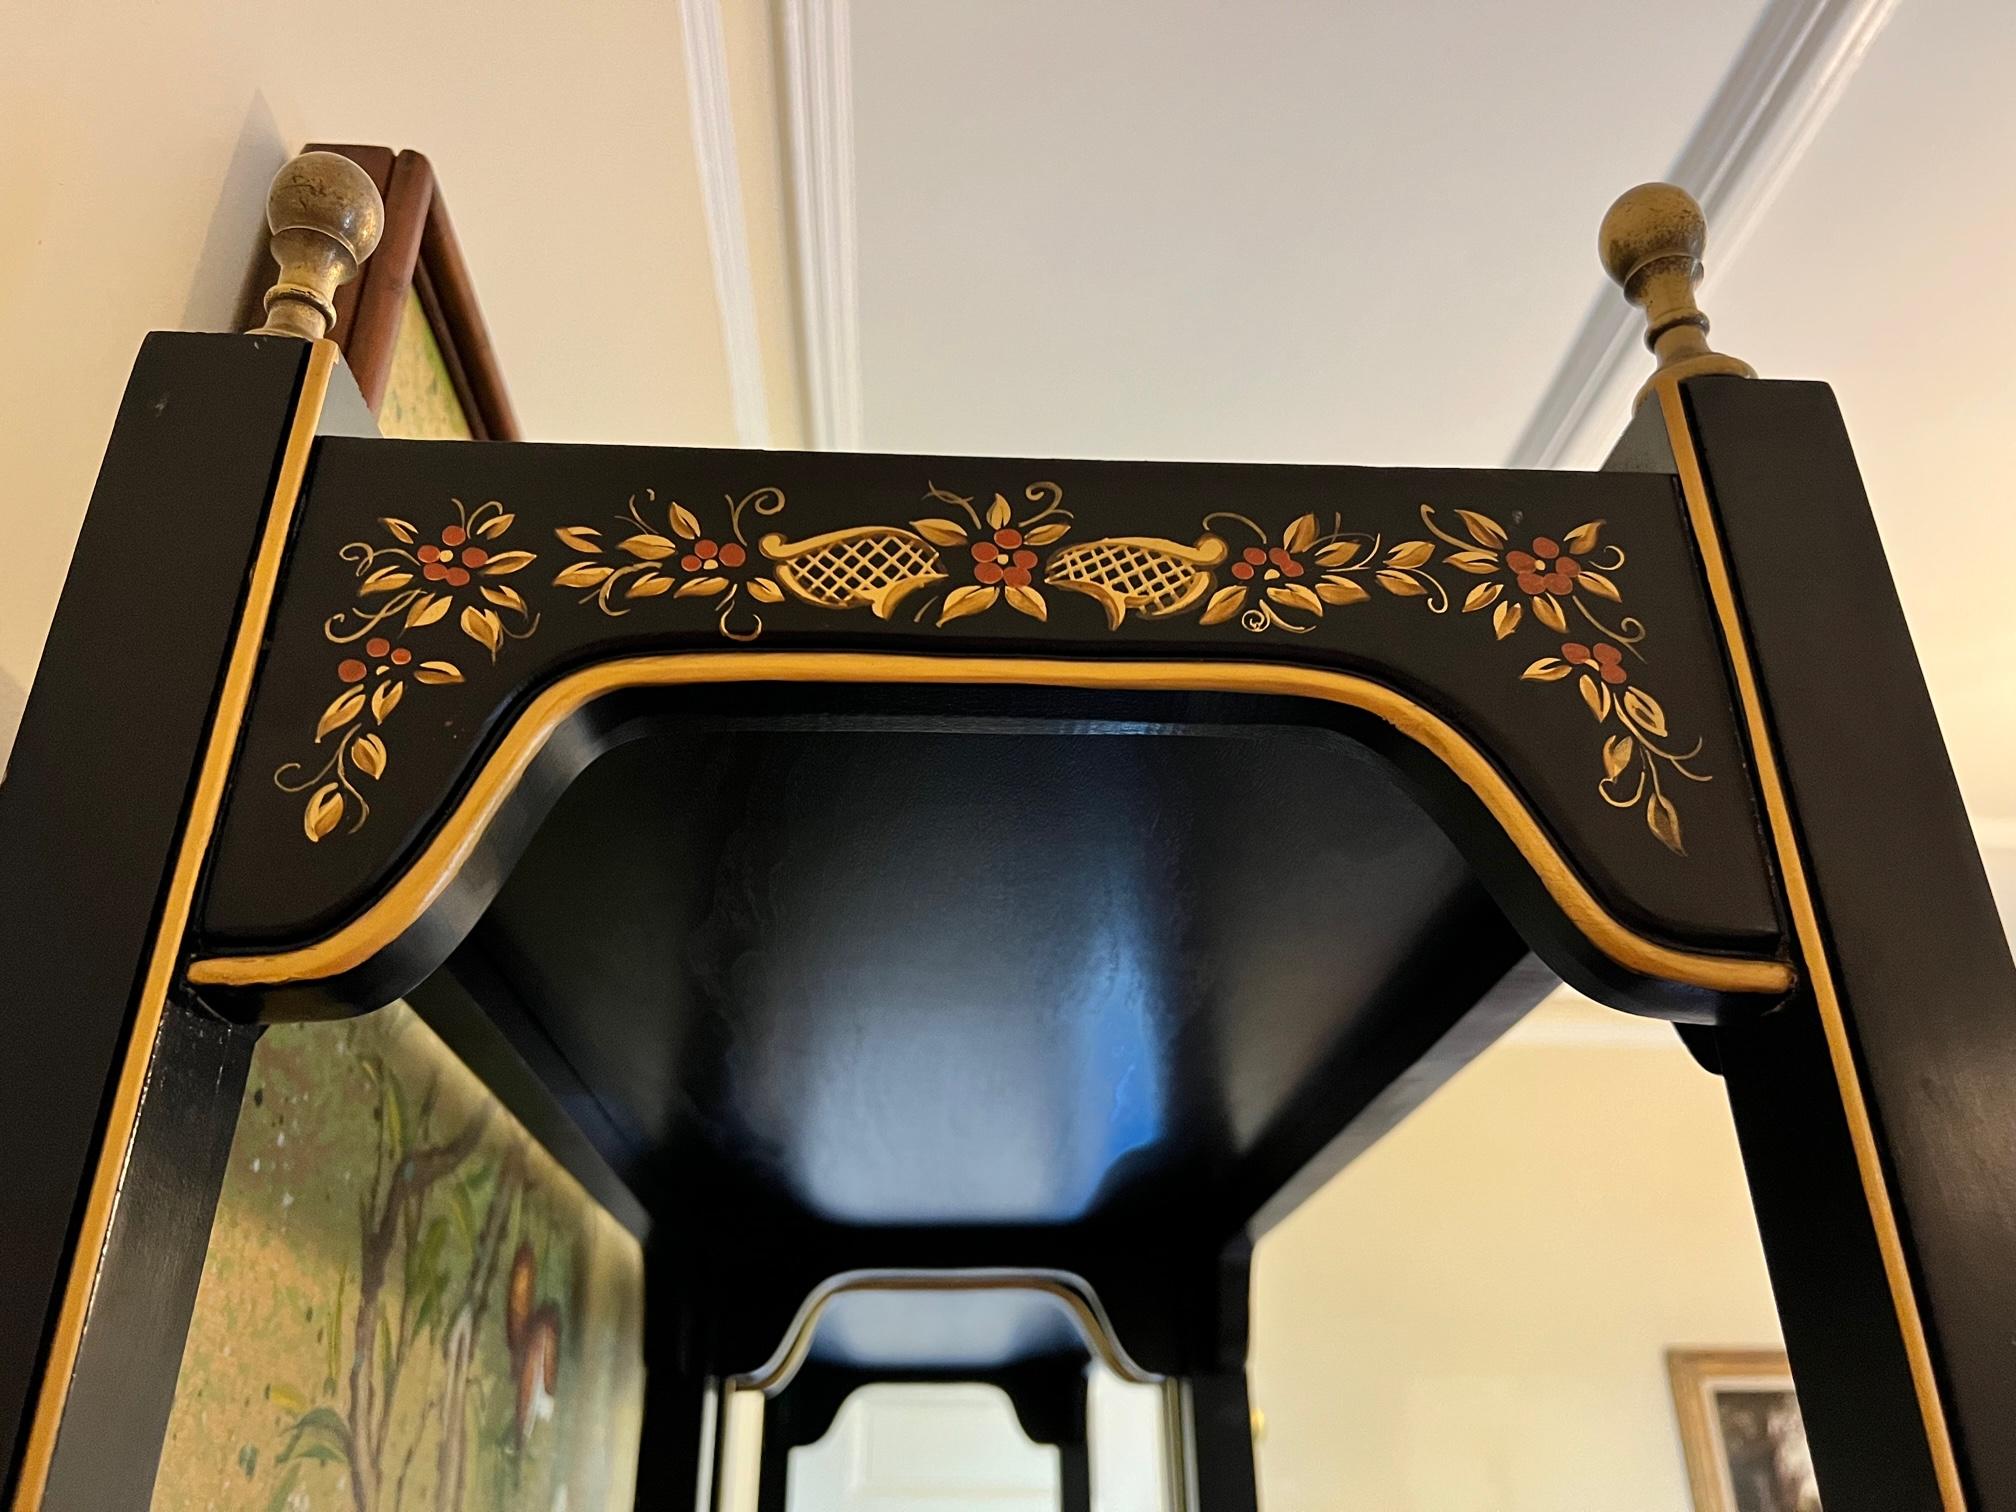 Ebonized Black Lacquer Chinoiserie Étagères with Hand Painted Gold and Floral Details